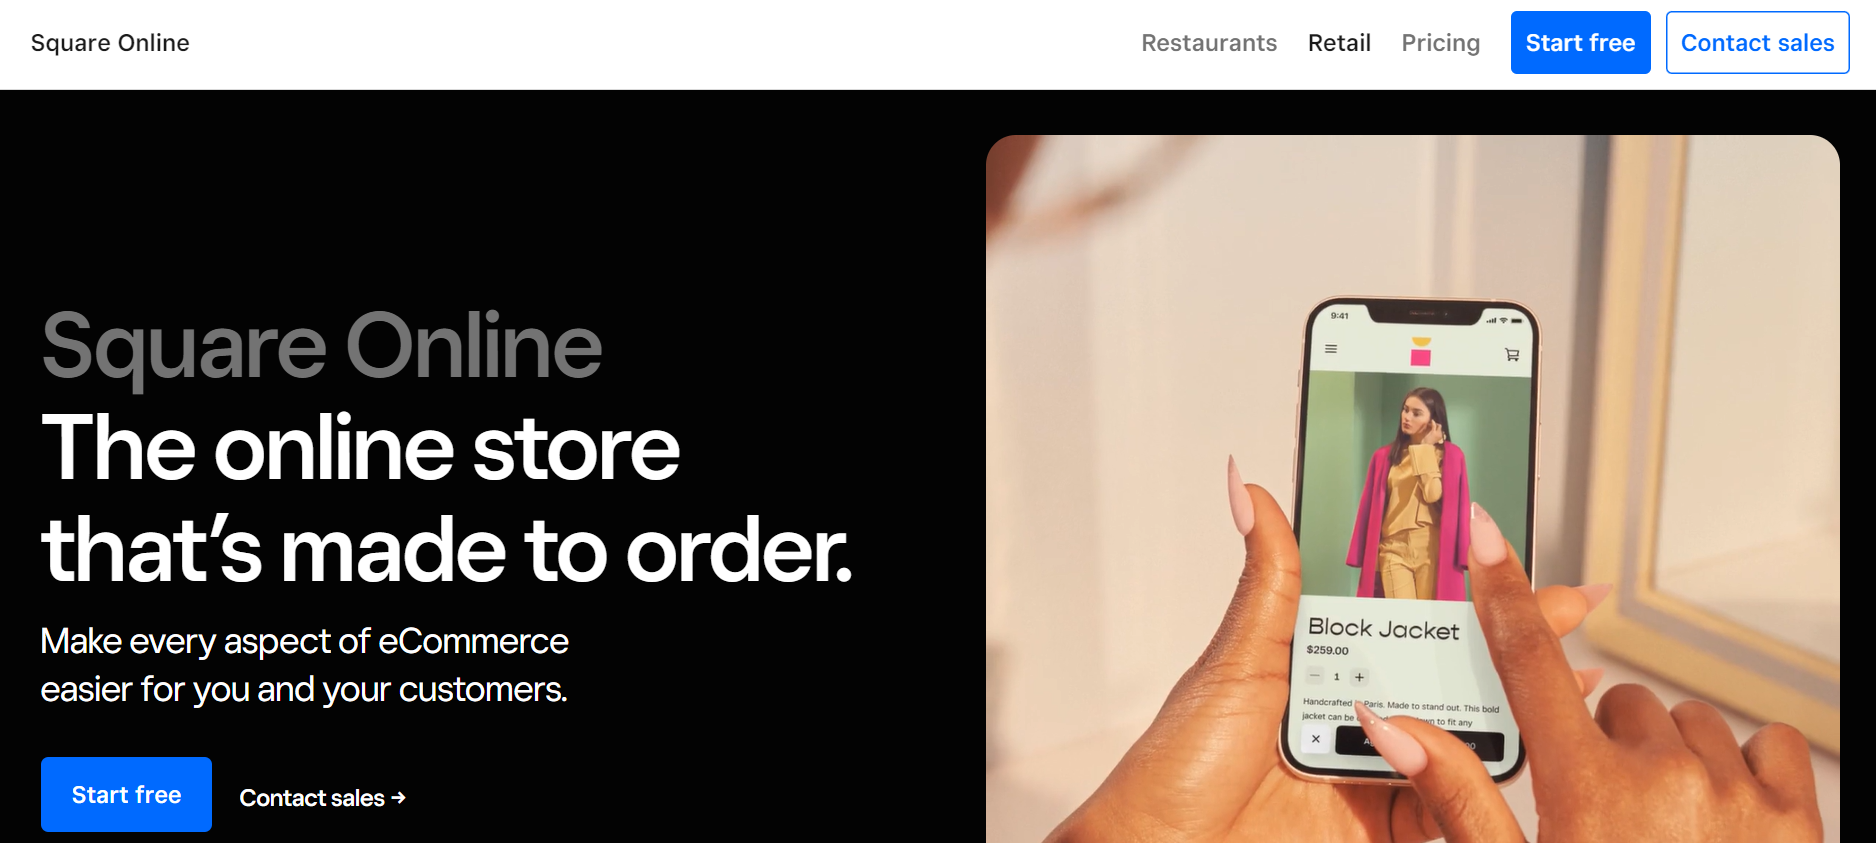 Square Online is the fourth shoutout in our Shopify competitors list